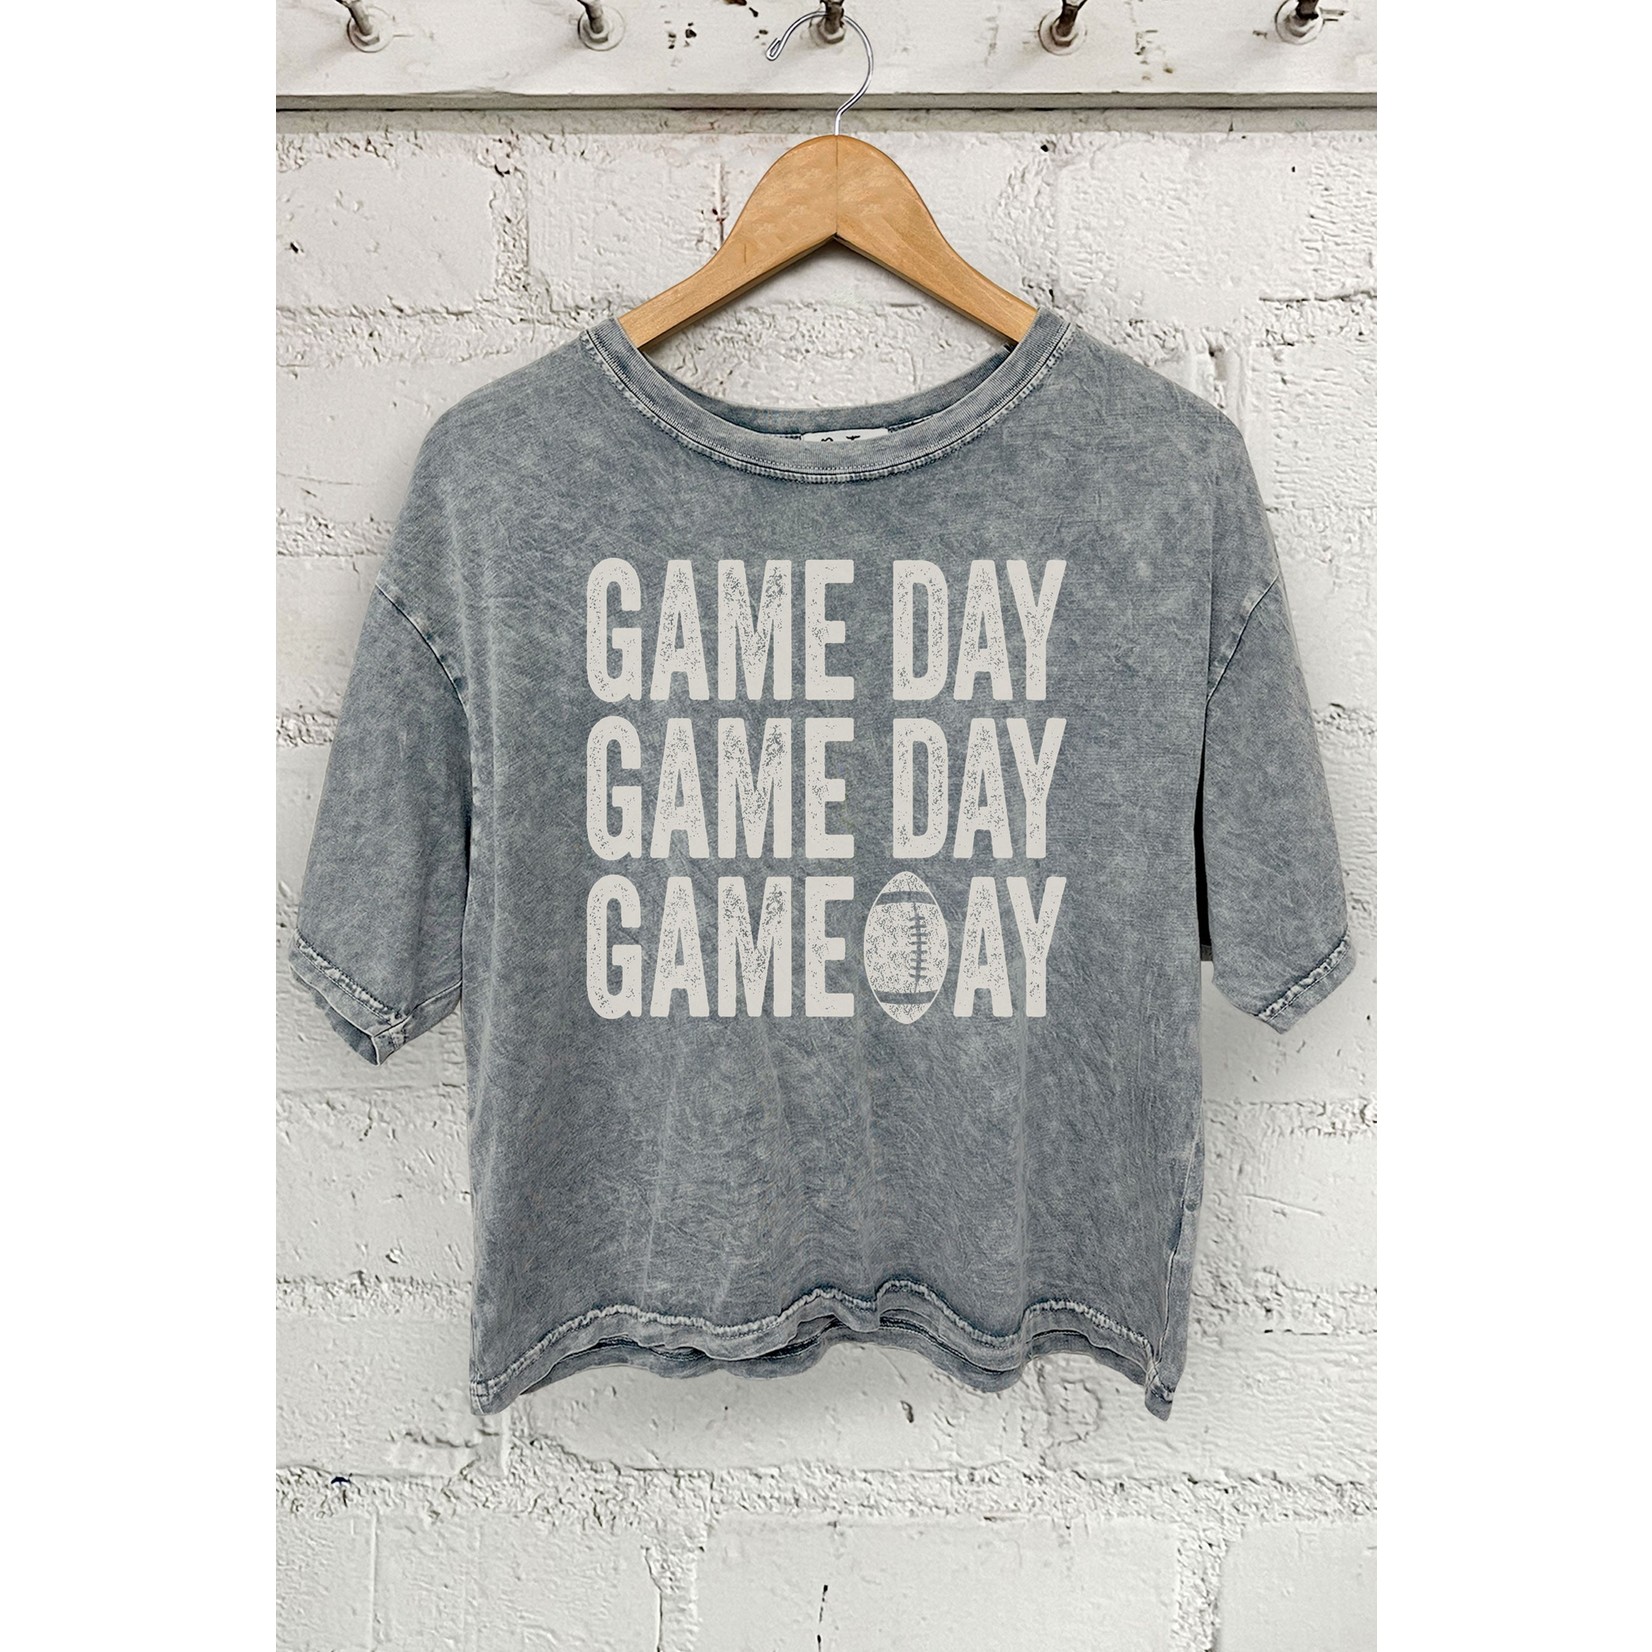 The Game Day Graphic Tee